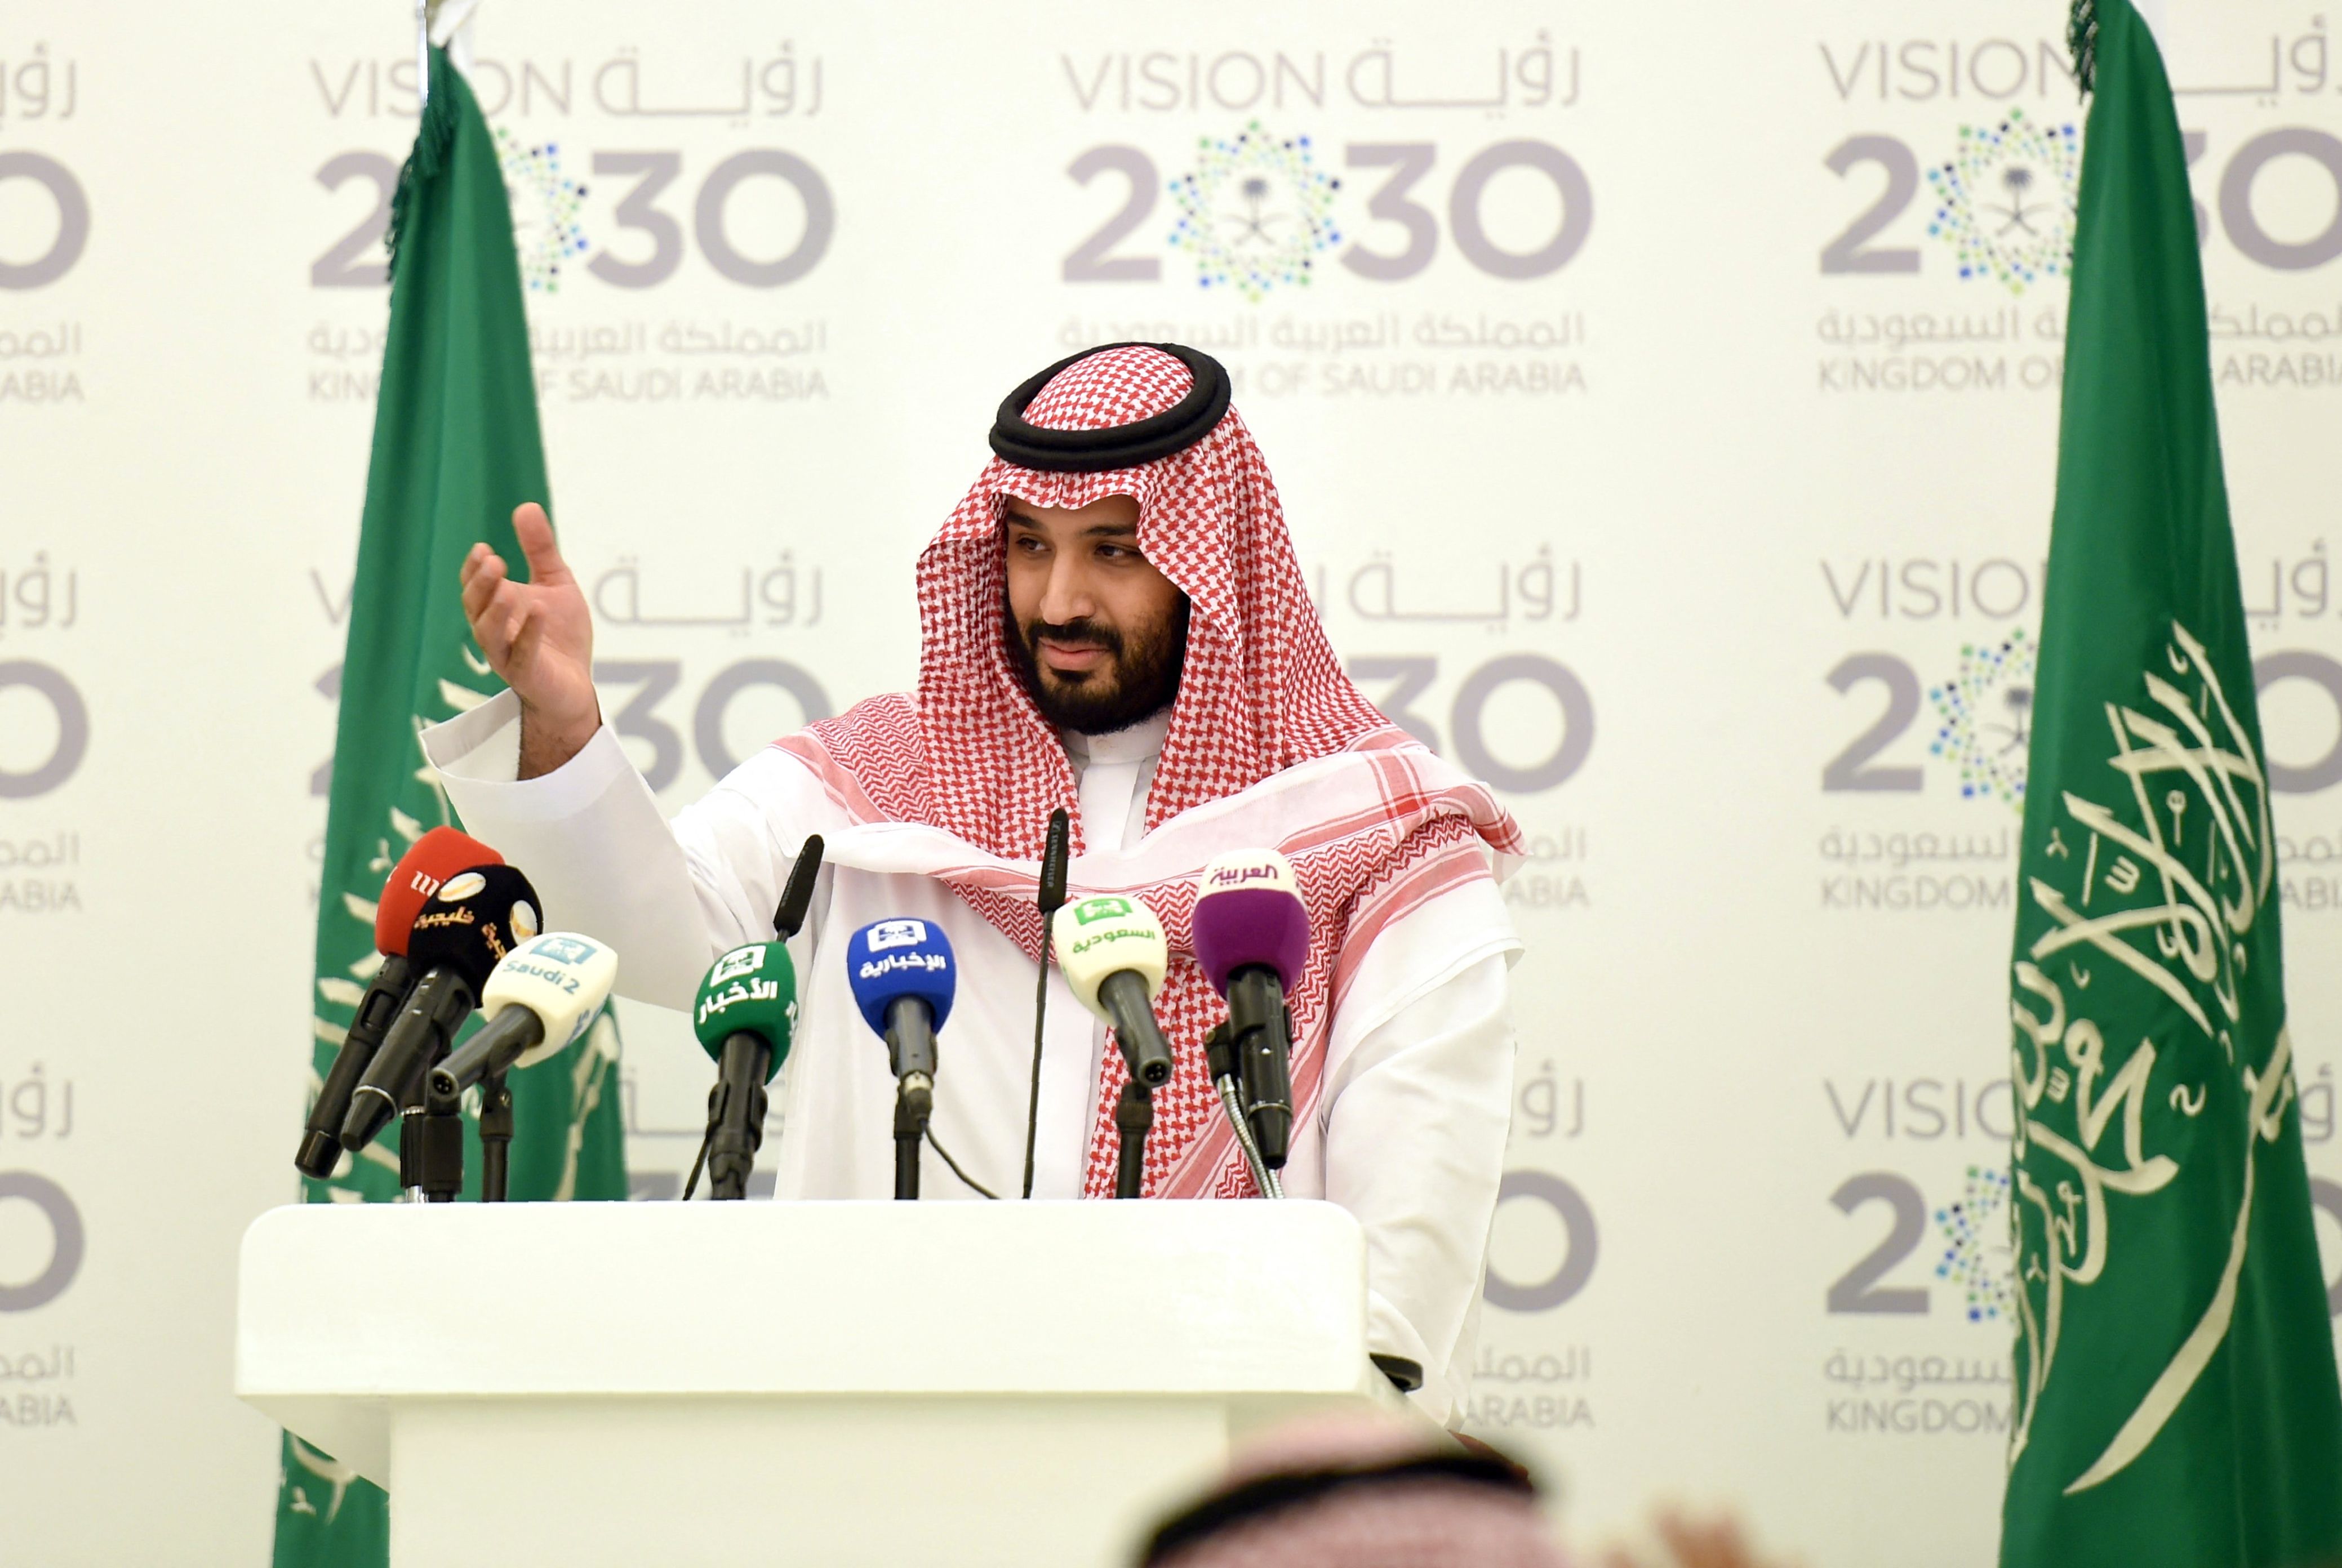 Saudi Defense Minister and Deputy Crown Prince Mohammed bin Salman gestures during a press conference in Riyadh, on April 25, 2016. The key figure behind the unveiling of a vast plan to restructure the kingdom's oil-dependent economy, the son of King Salman has risen to among Saudi Arabia's most influential figures since being named second-in-line to the throne in 2015. Salman announced his economic reform plan known as 